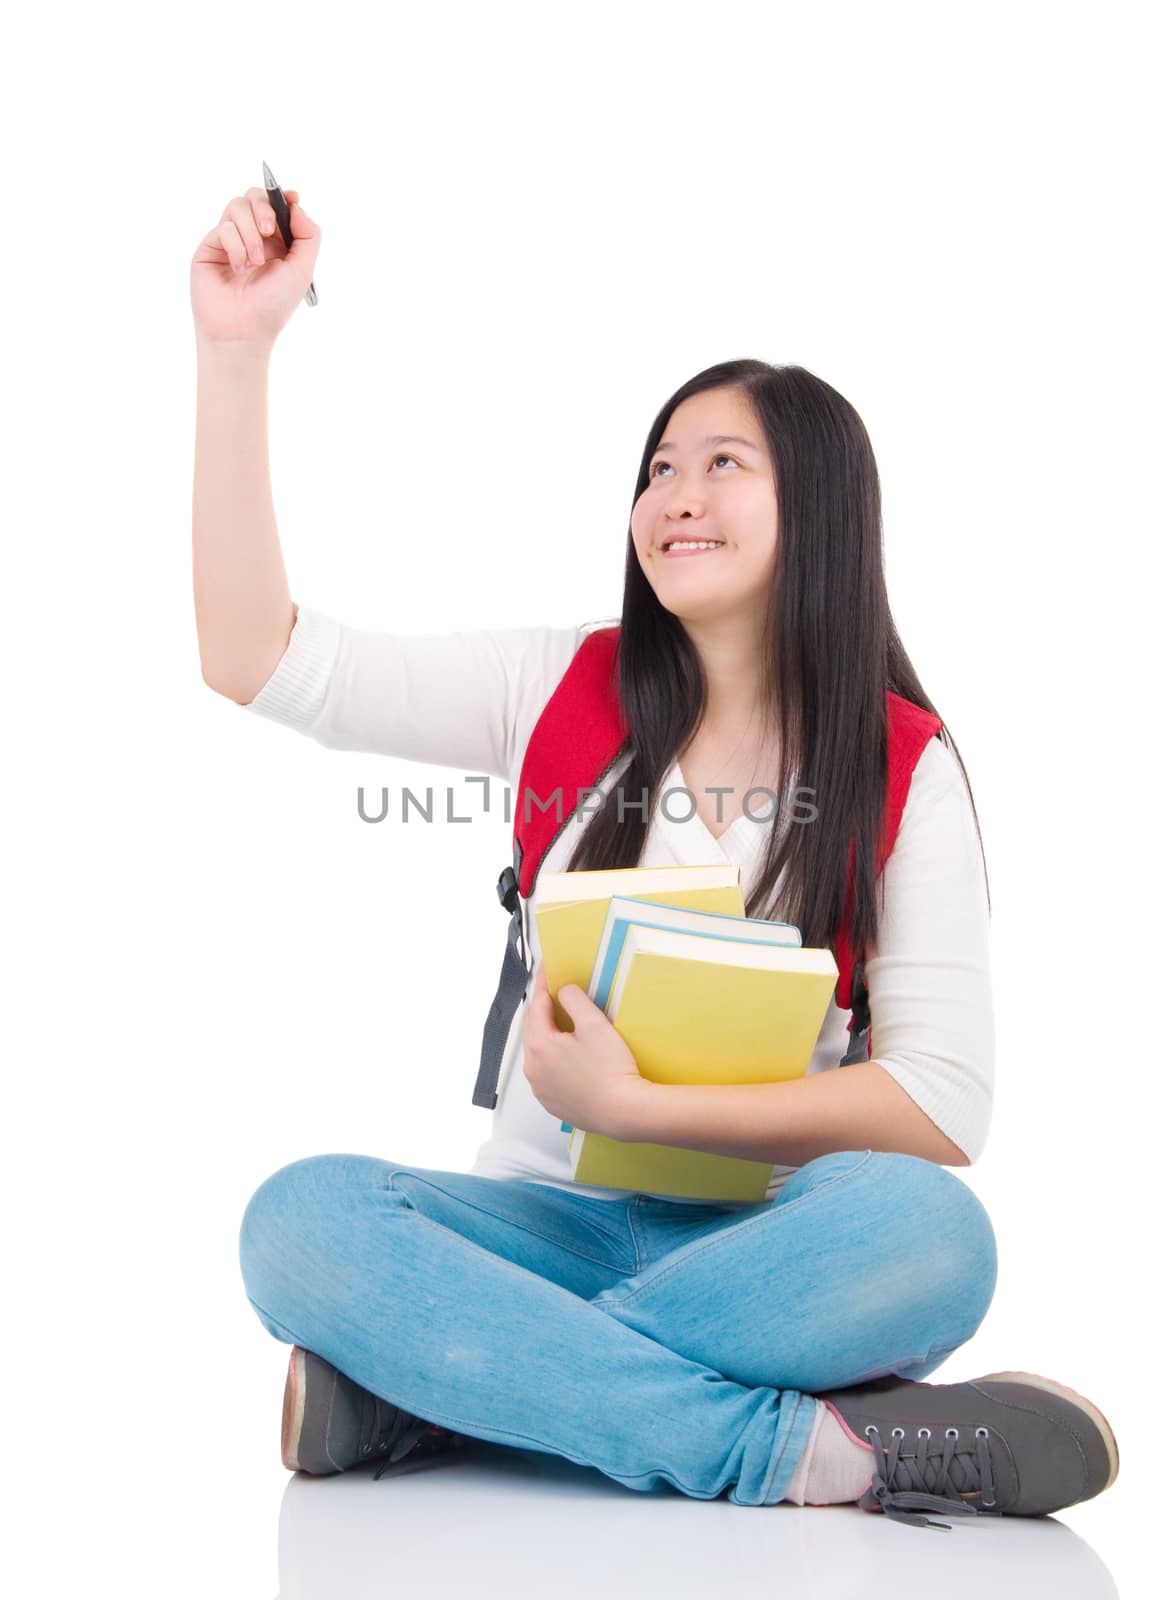 asian student girl sitting and drawing over white background